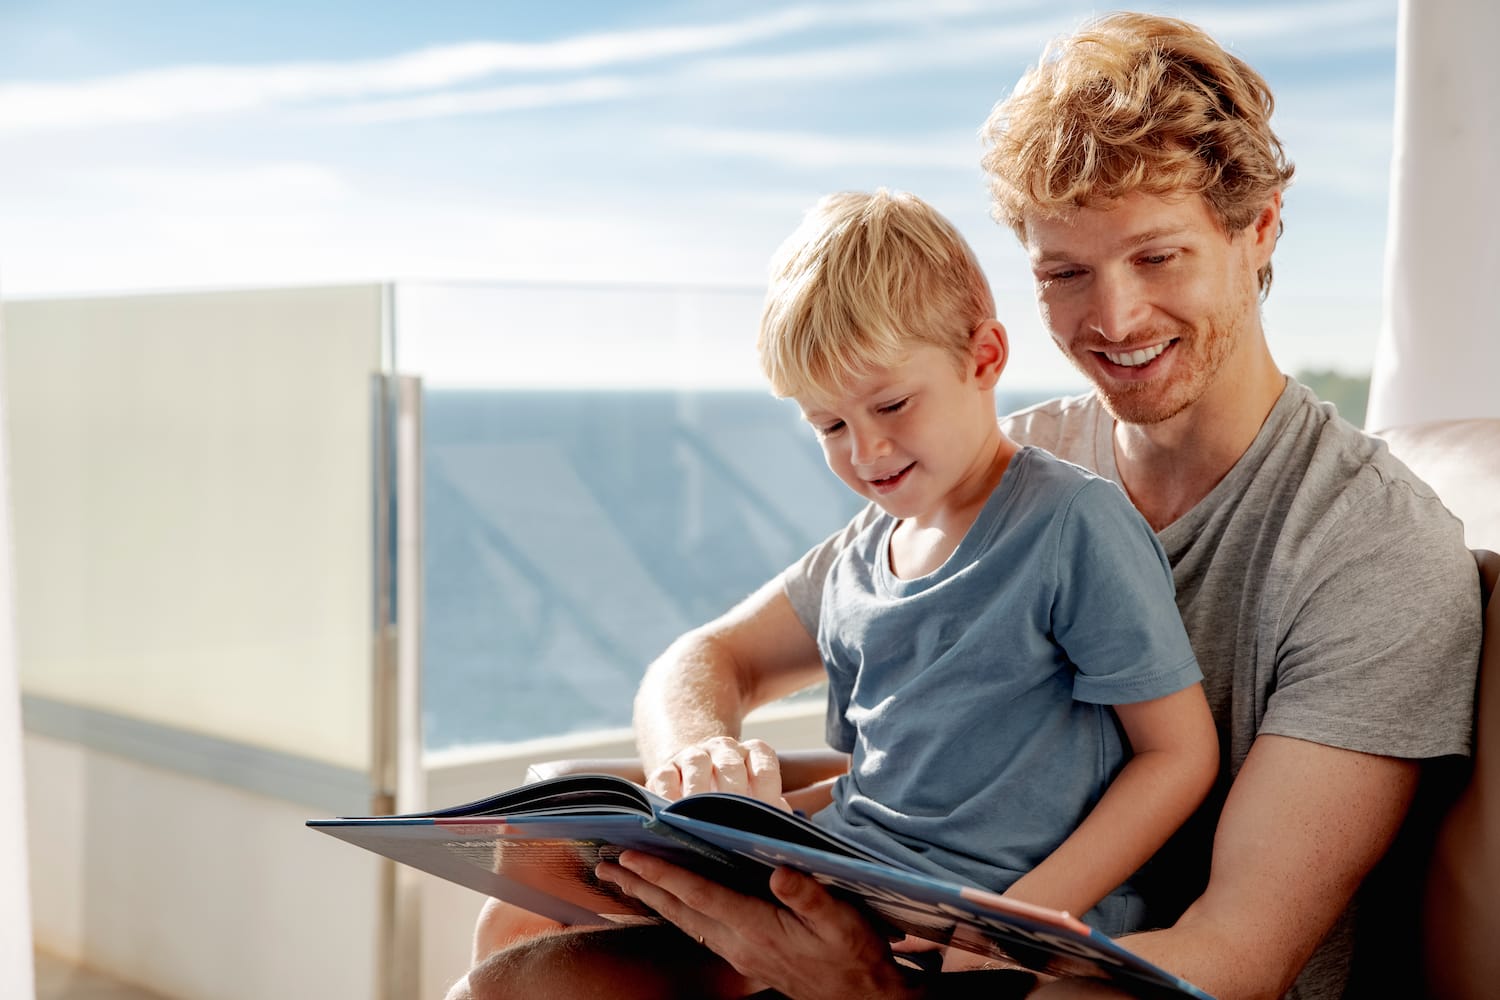 a man and child reading a book